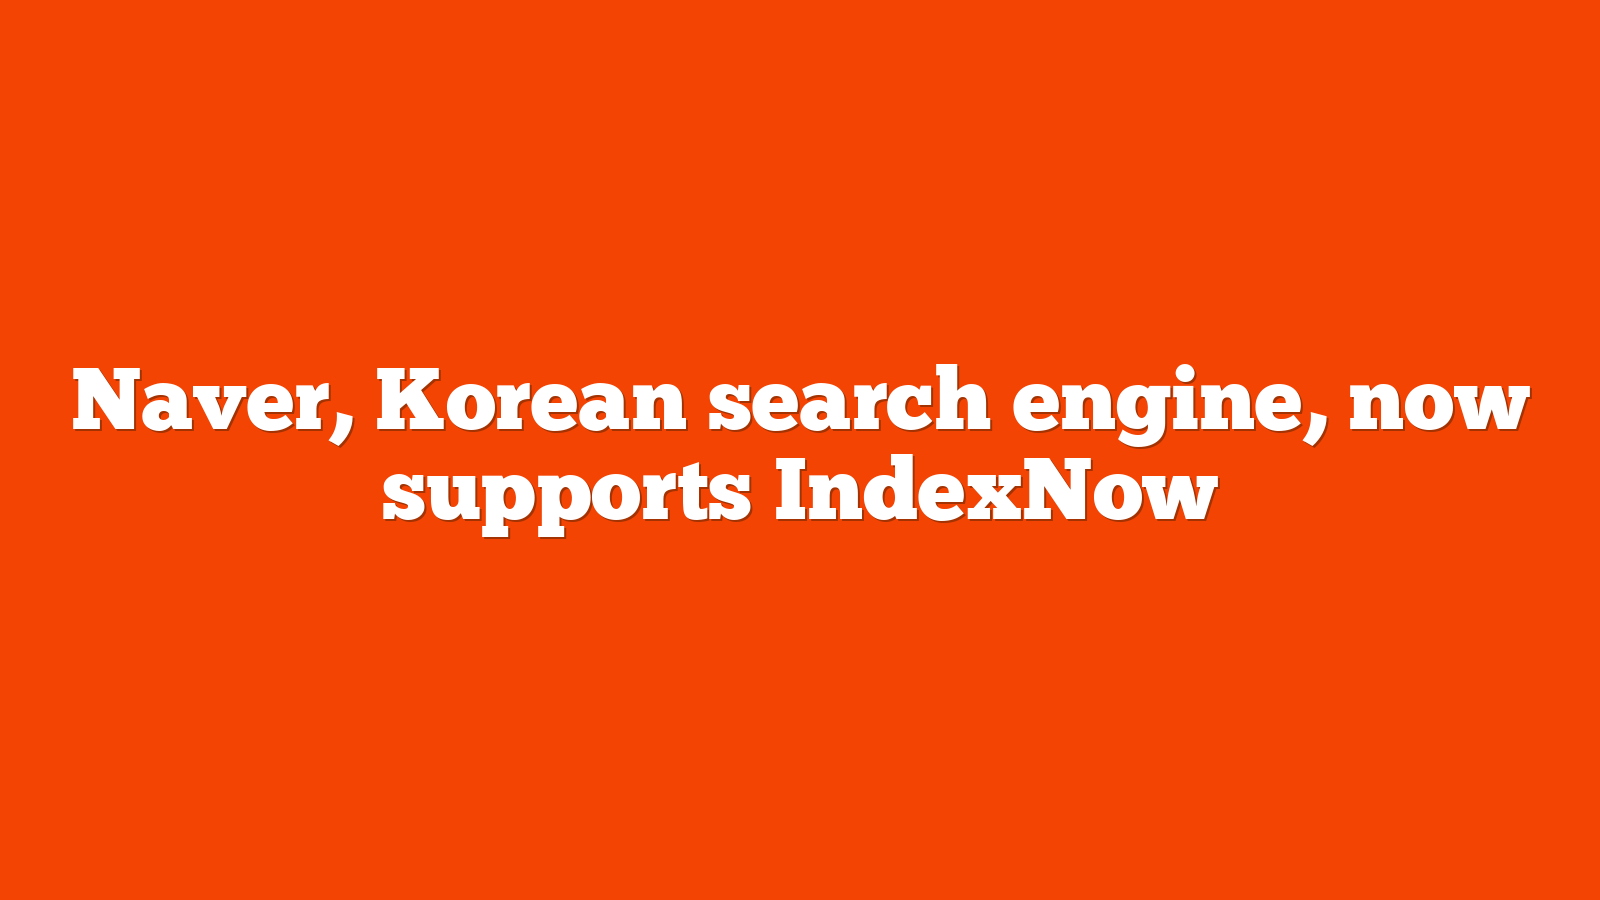 Naver, Korean search engine, now supports IndexNow